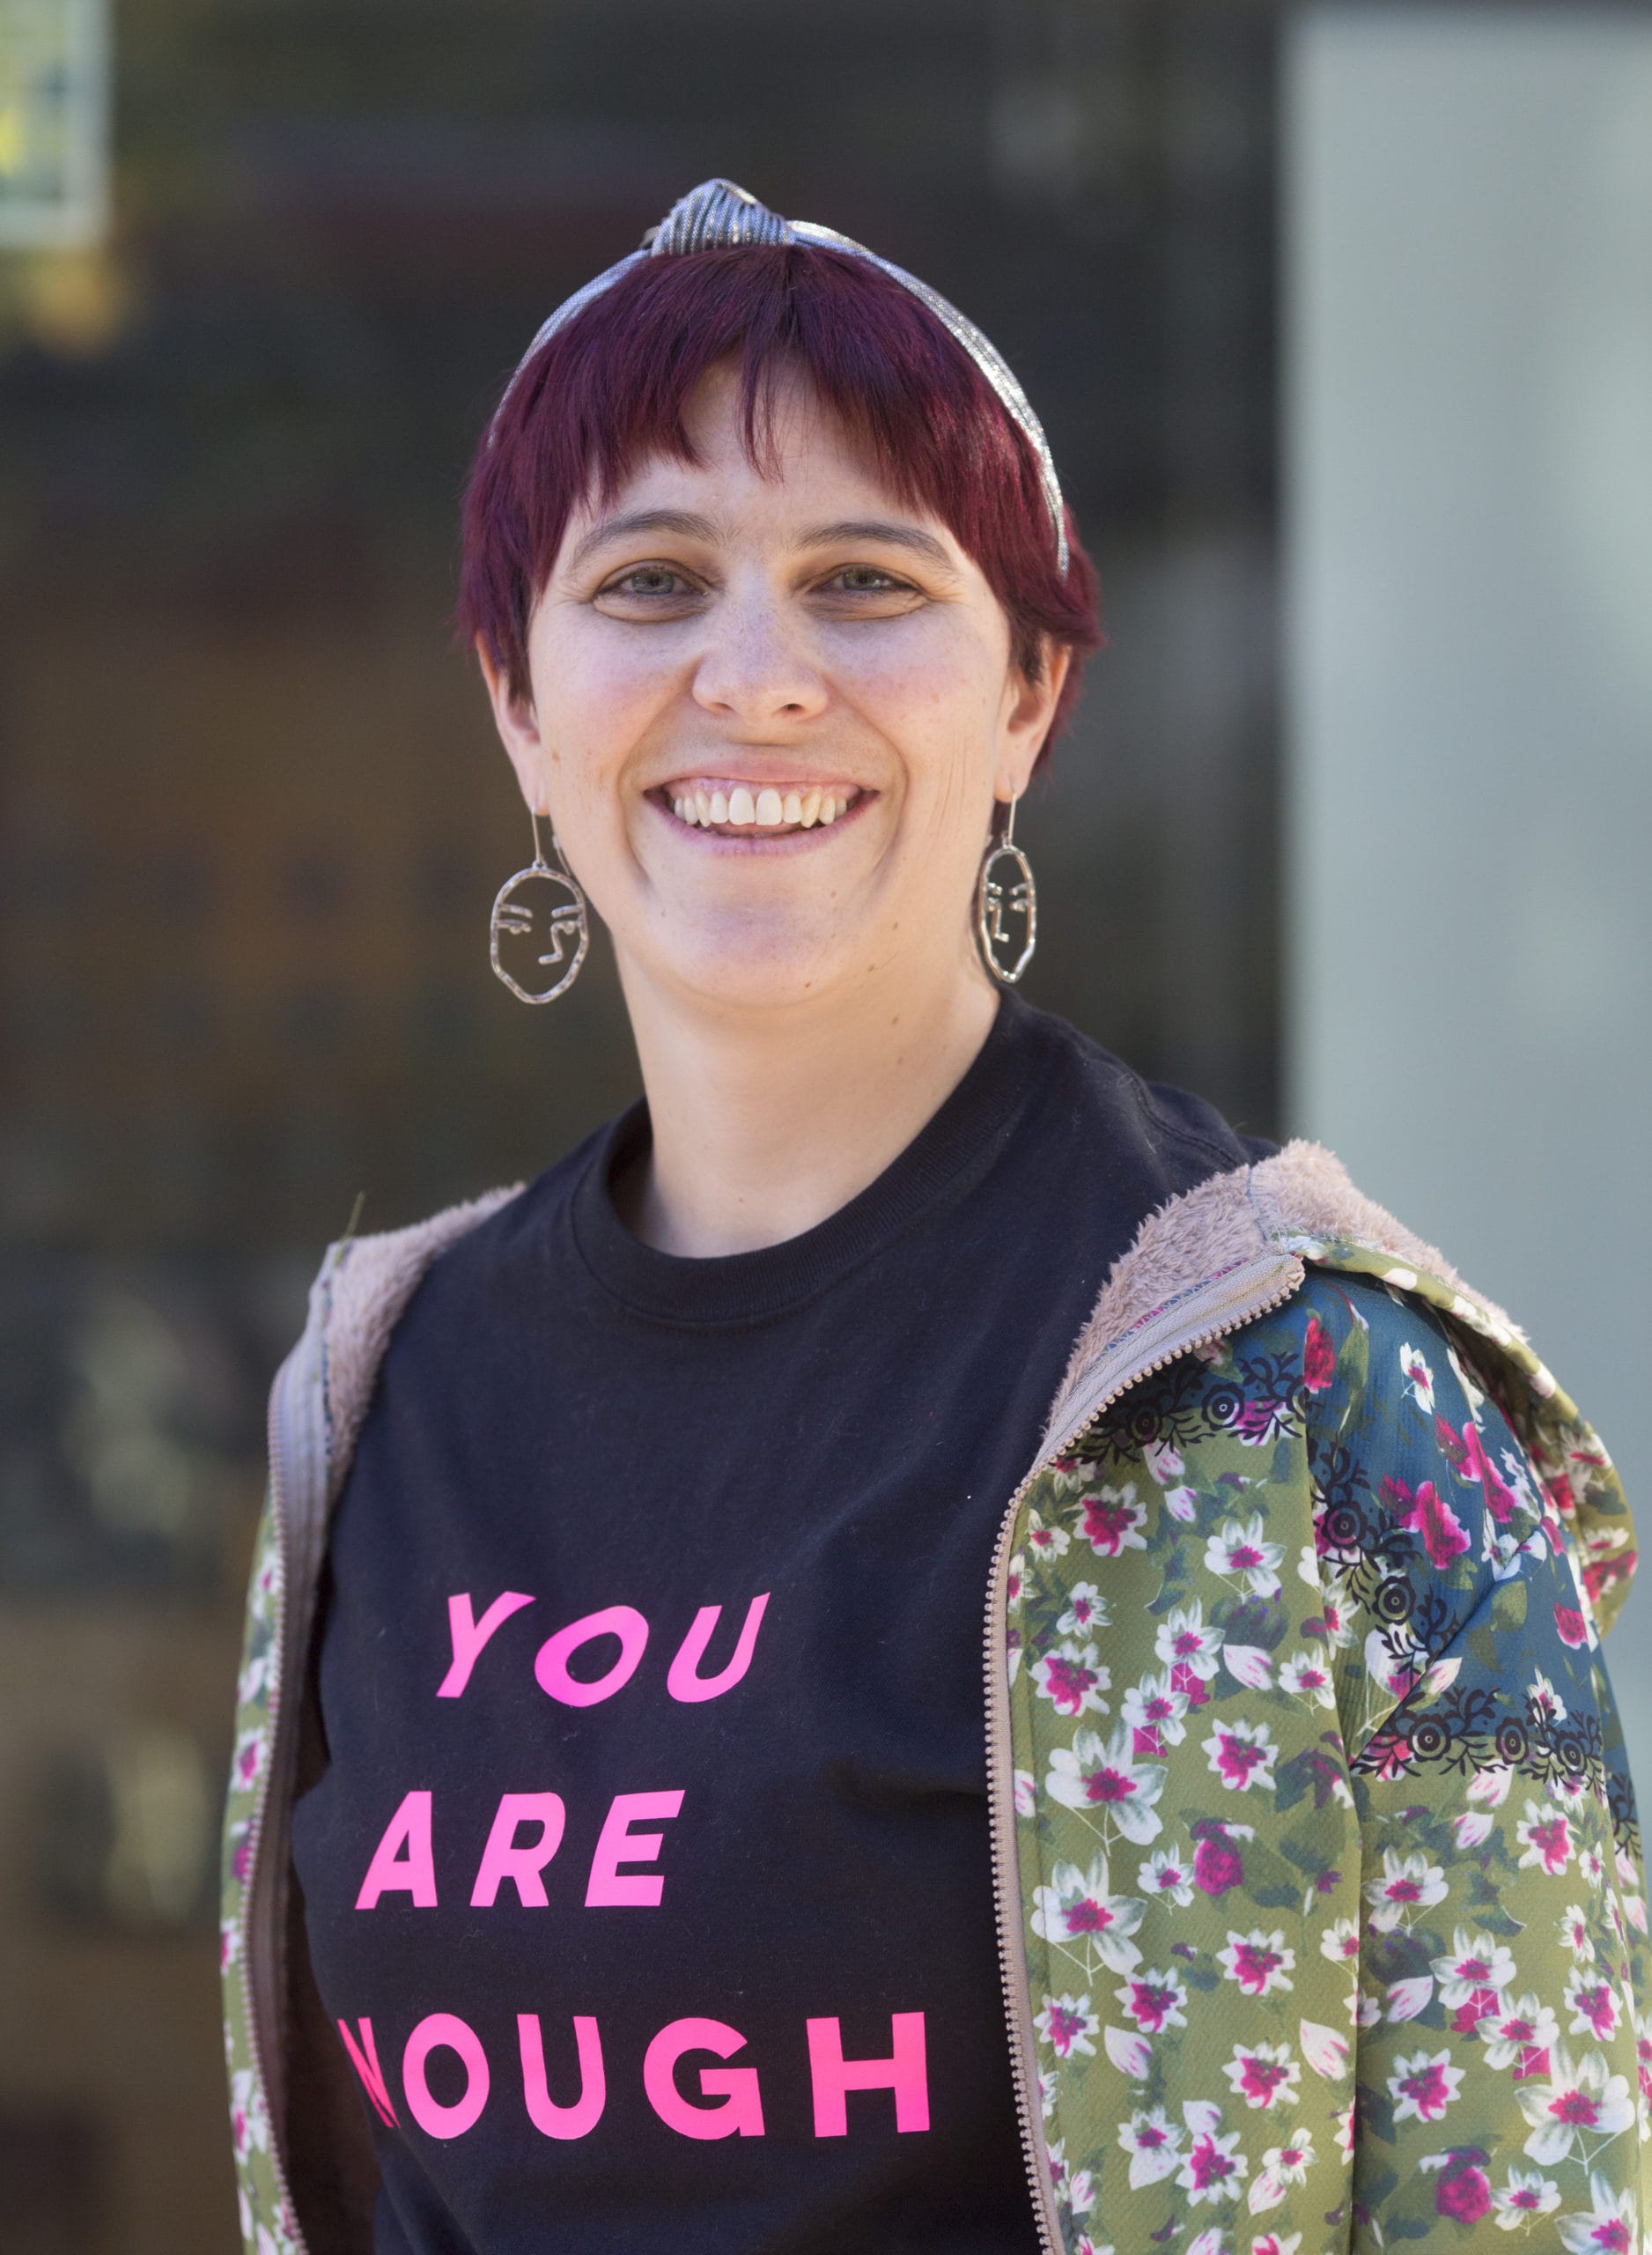 Image of a white woman with redish-purple hair smiling at the camera. She is wearing a headband and earrings. She has on a black shirt that says, "YOU ARE ENOUGH".